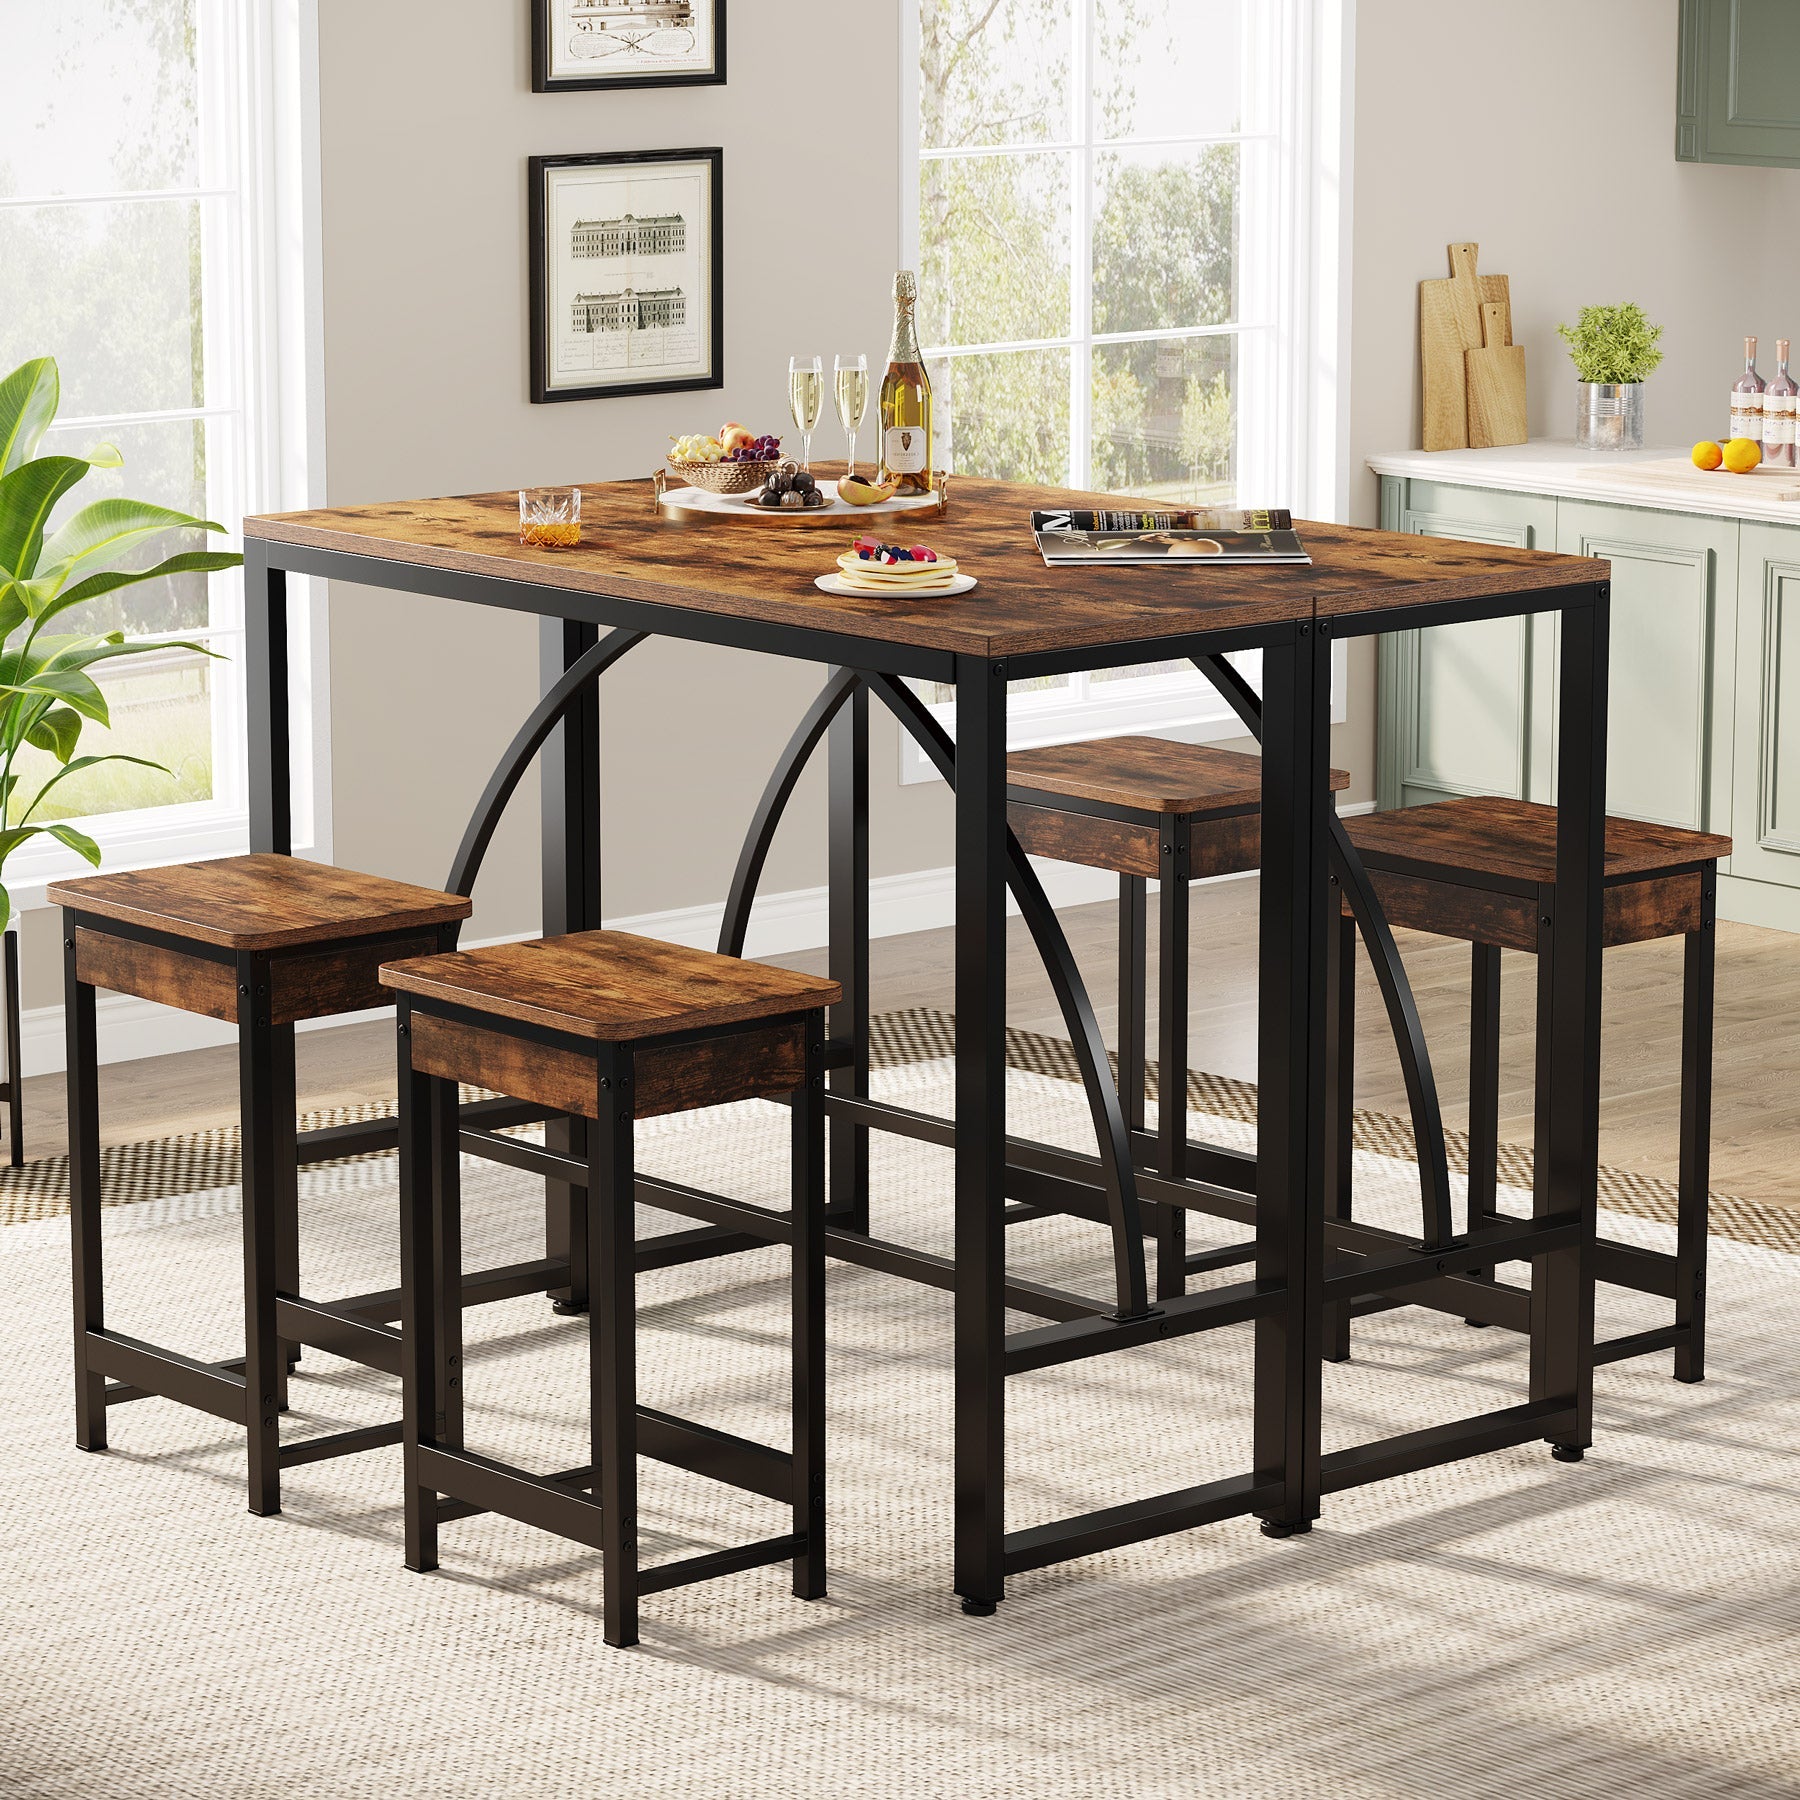 3-Piece Bar Table Set, 43.7-Inch Dining Table with 2 Stools